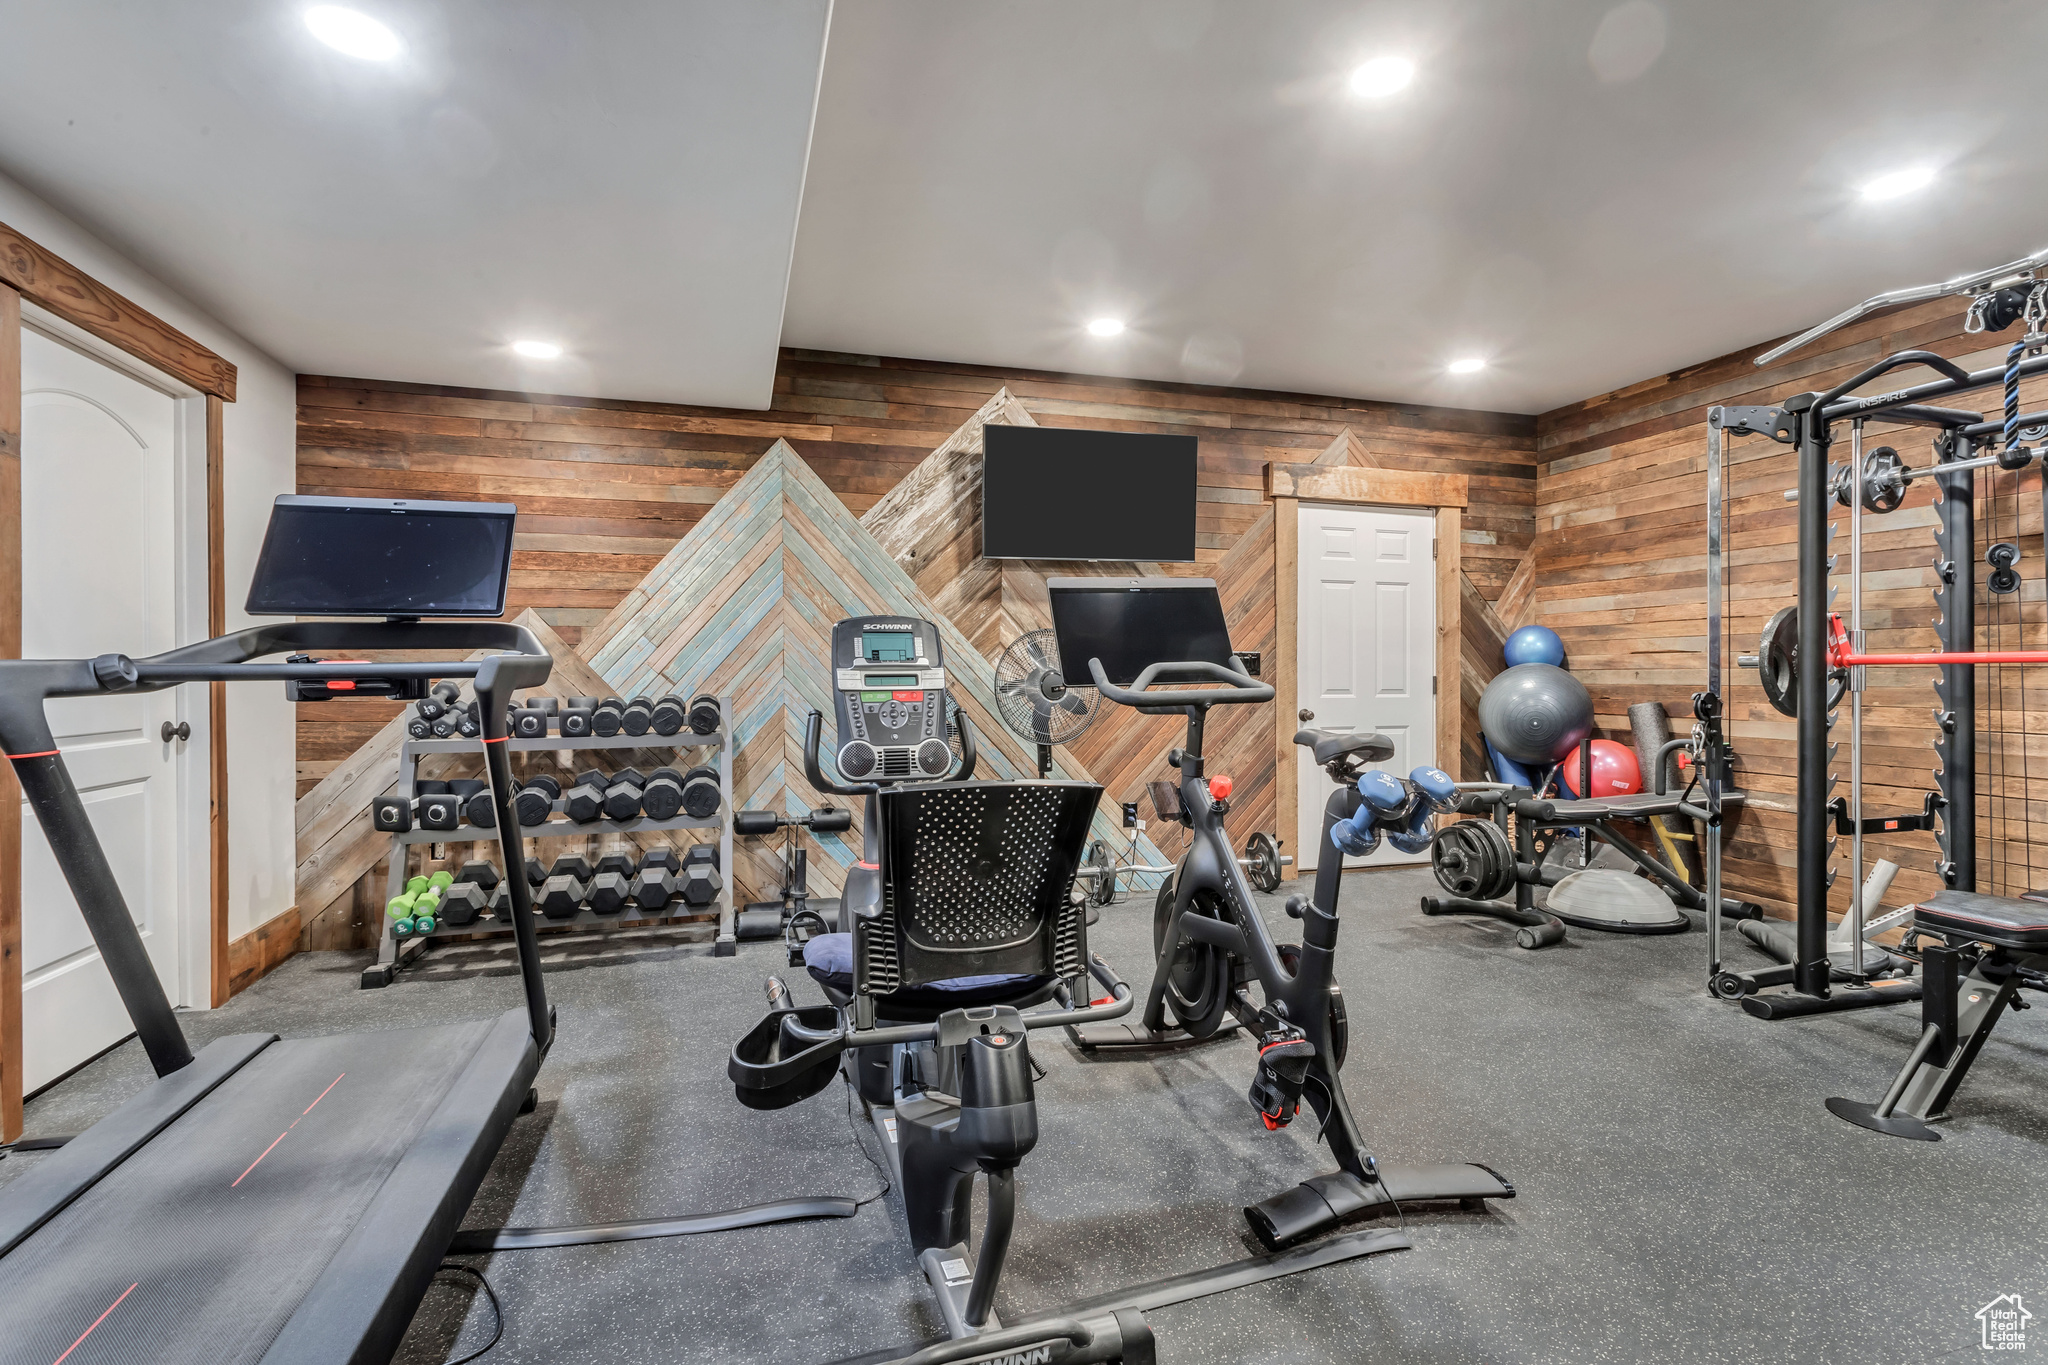 Workout area featuring wooden walls